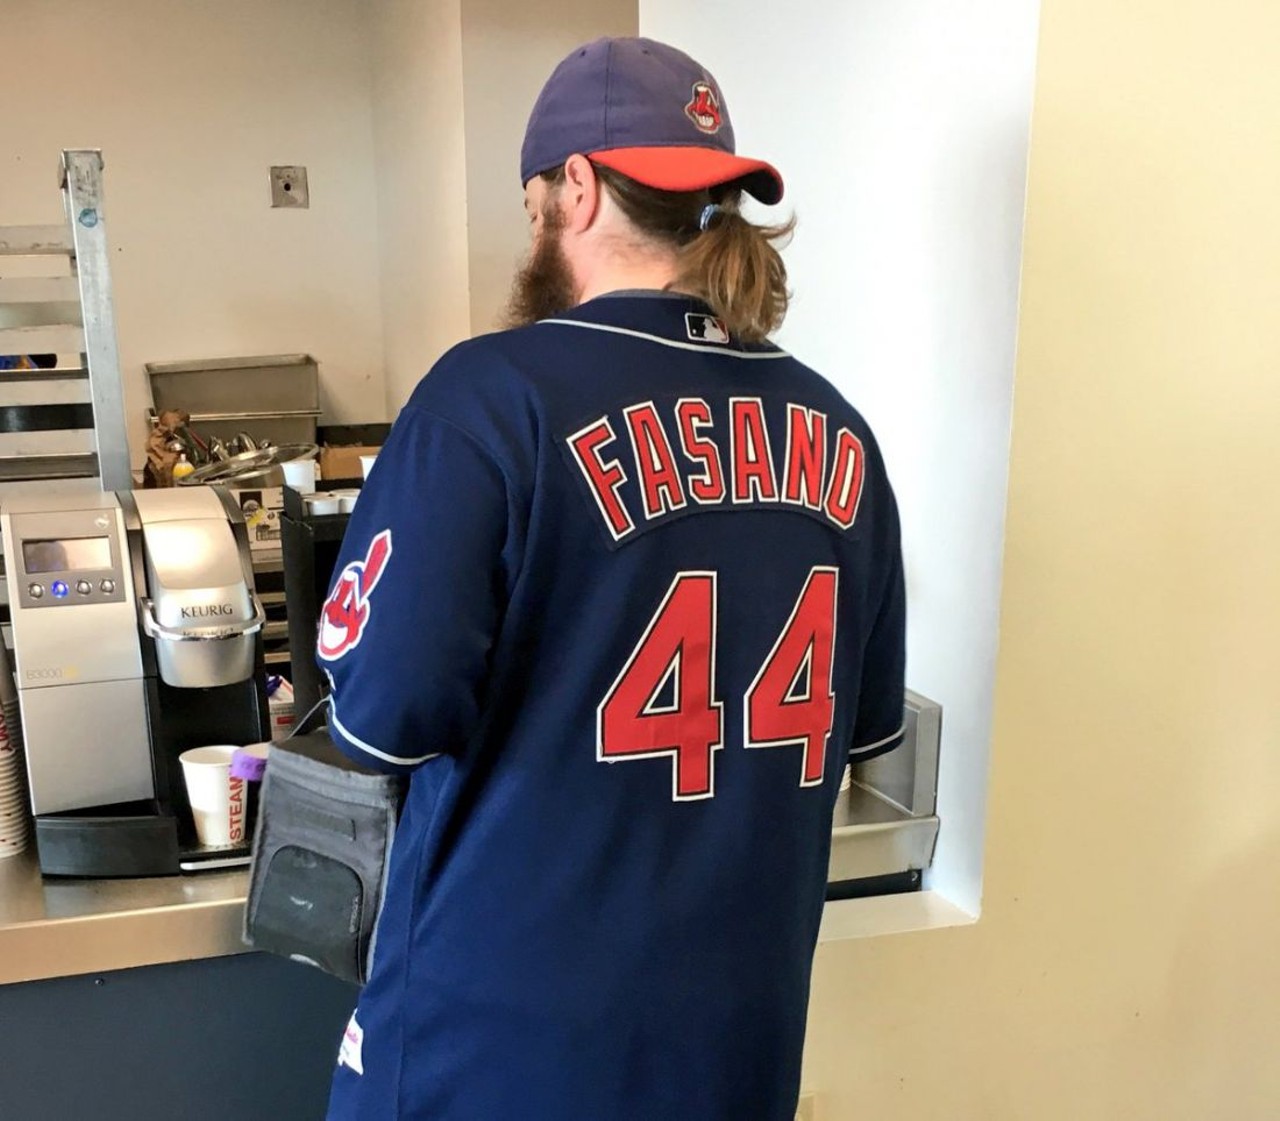 Indians 2017: Which player's jersey should you buy? 